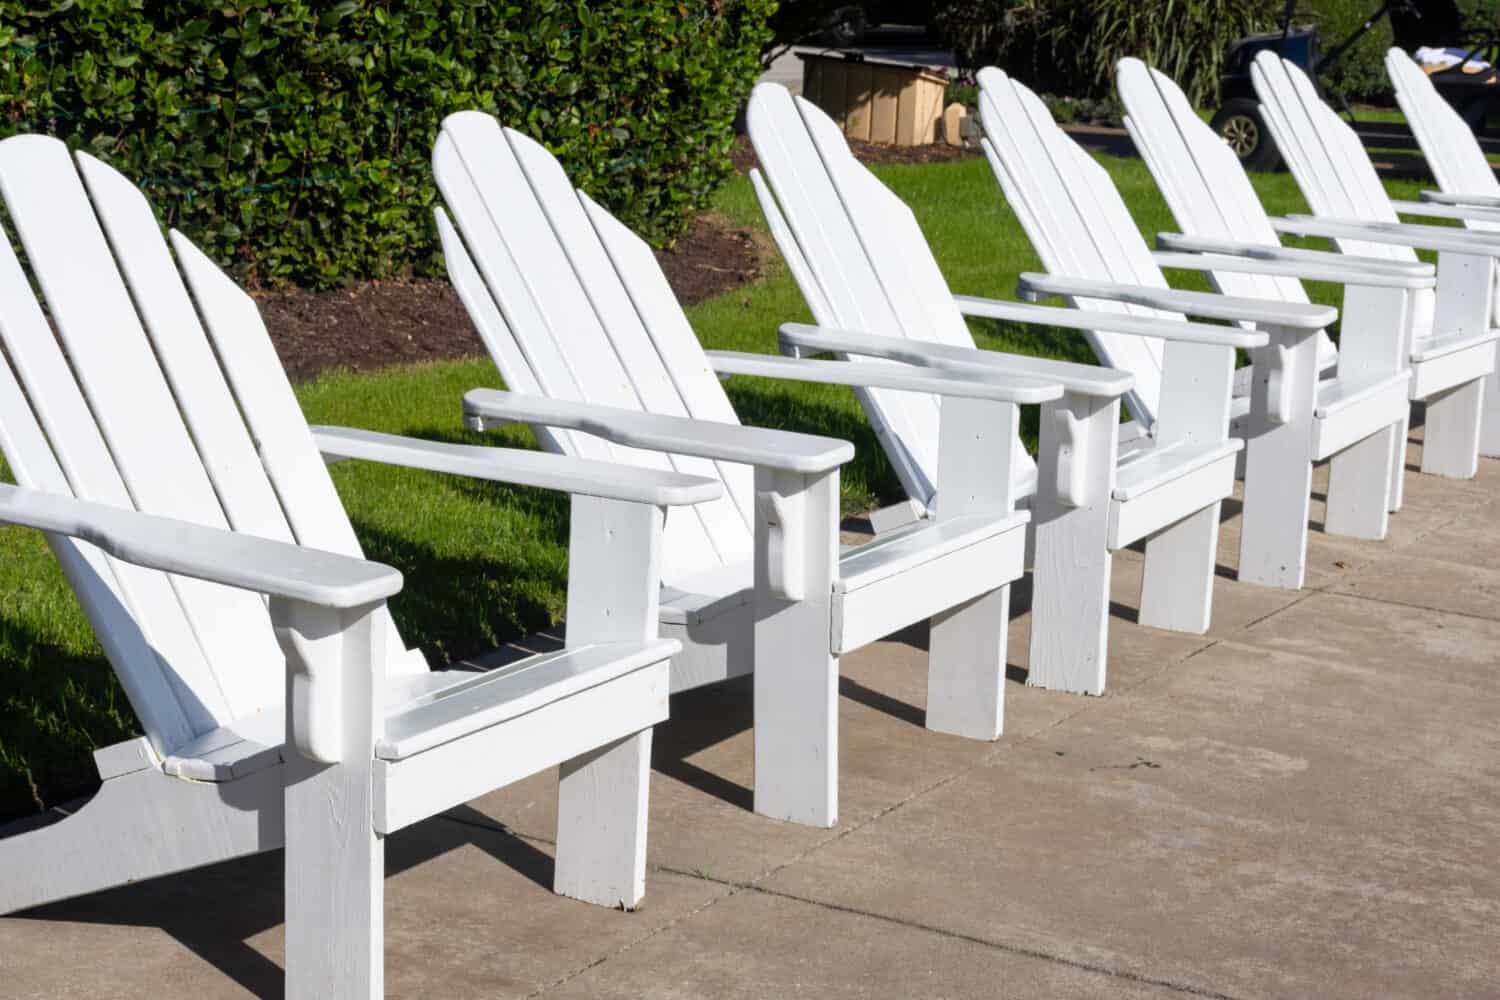 A row of white Muskoka chairs suggests relaxation, wealth, or the country club set.